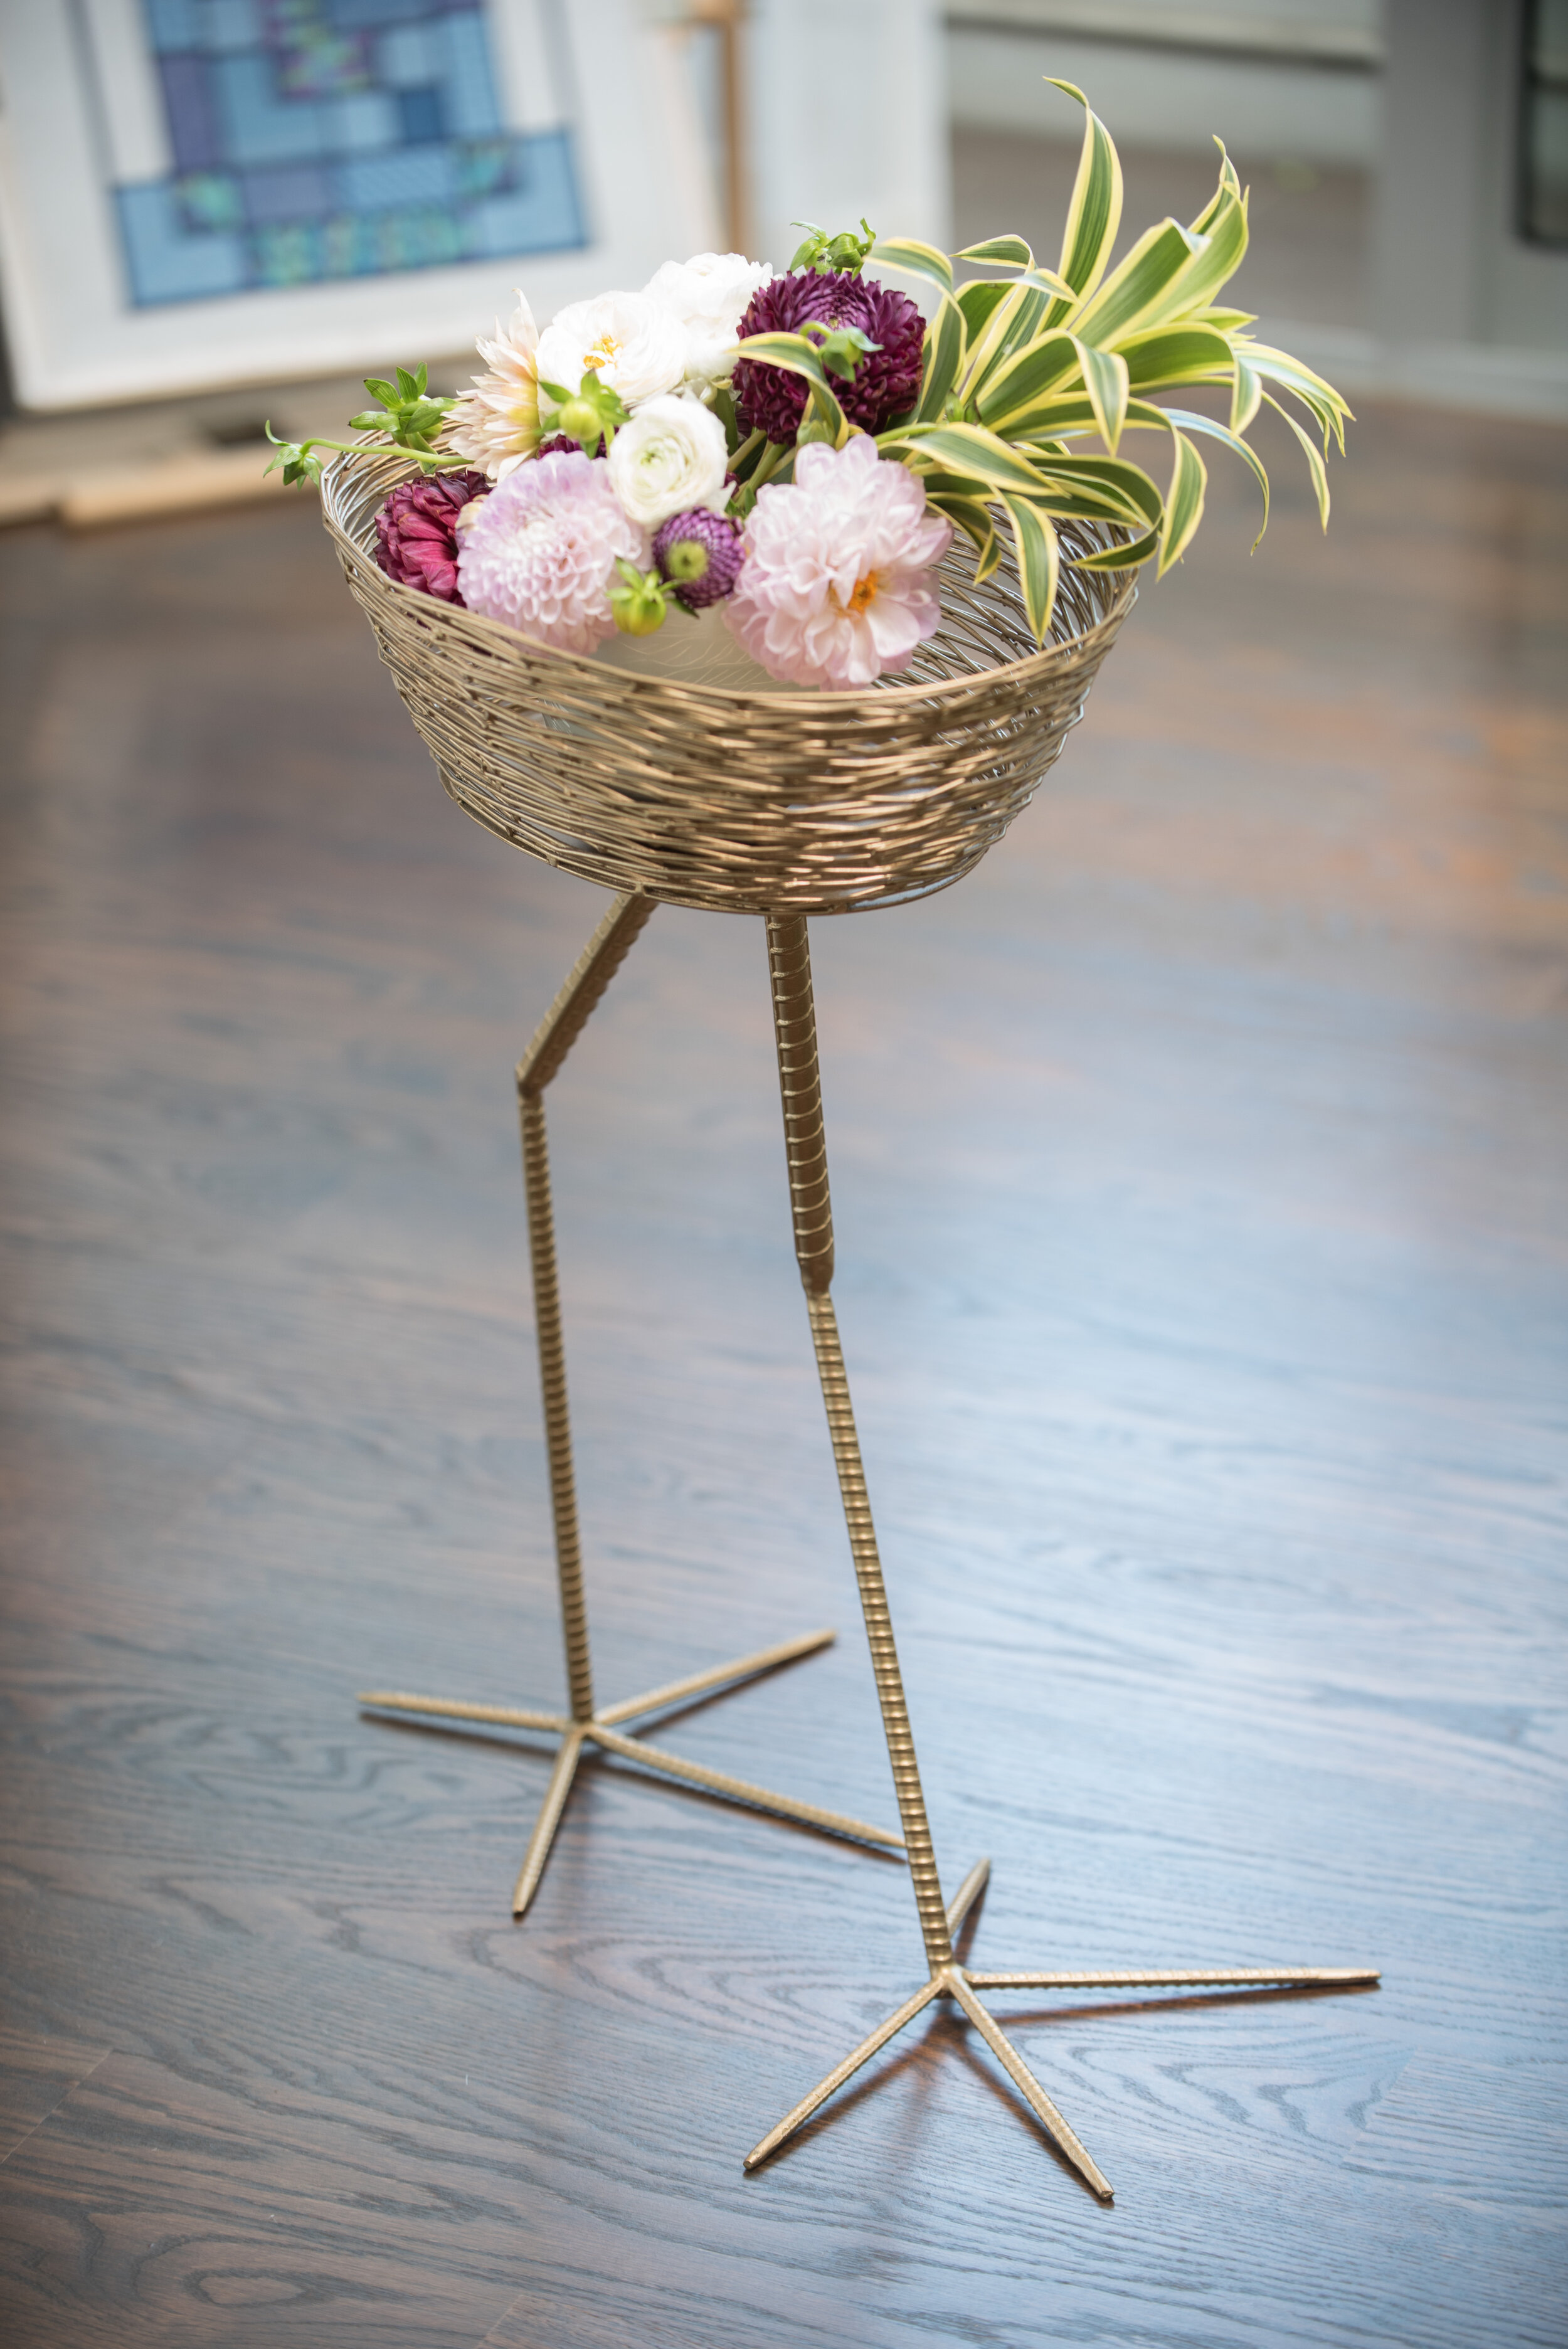 Scupltural woven gold basket on tall gold bird legs, holding pink, purple, and green flowers.